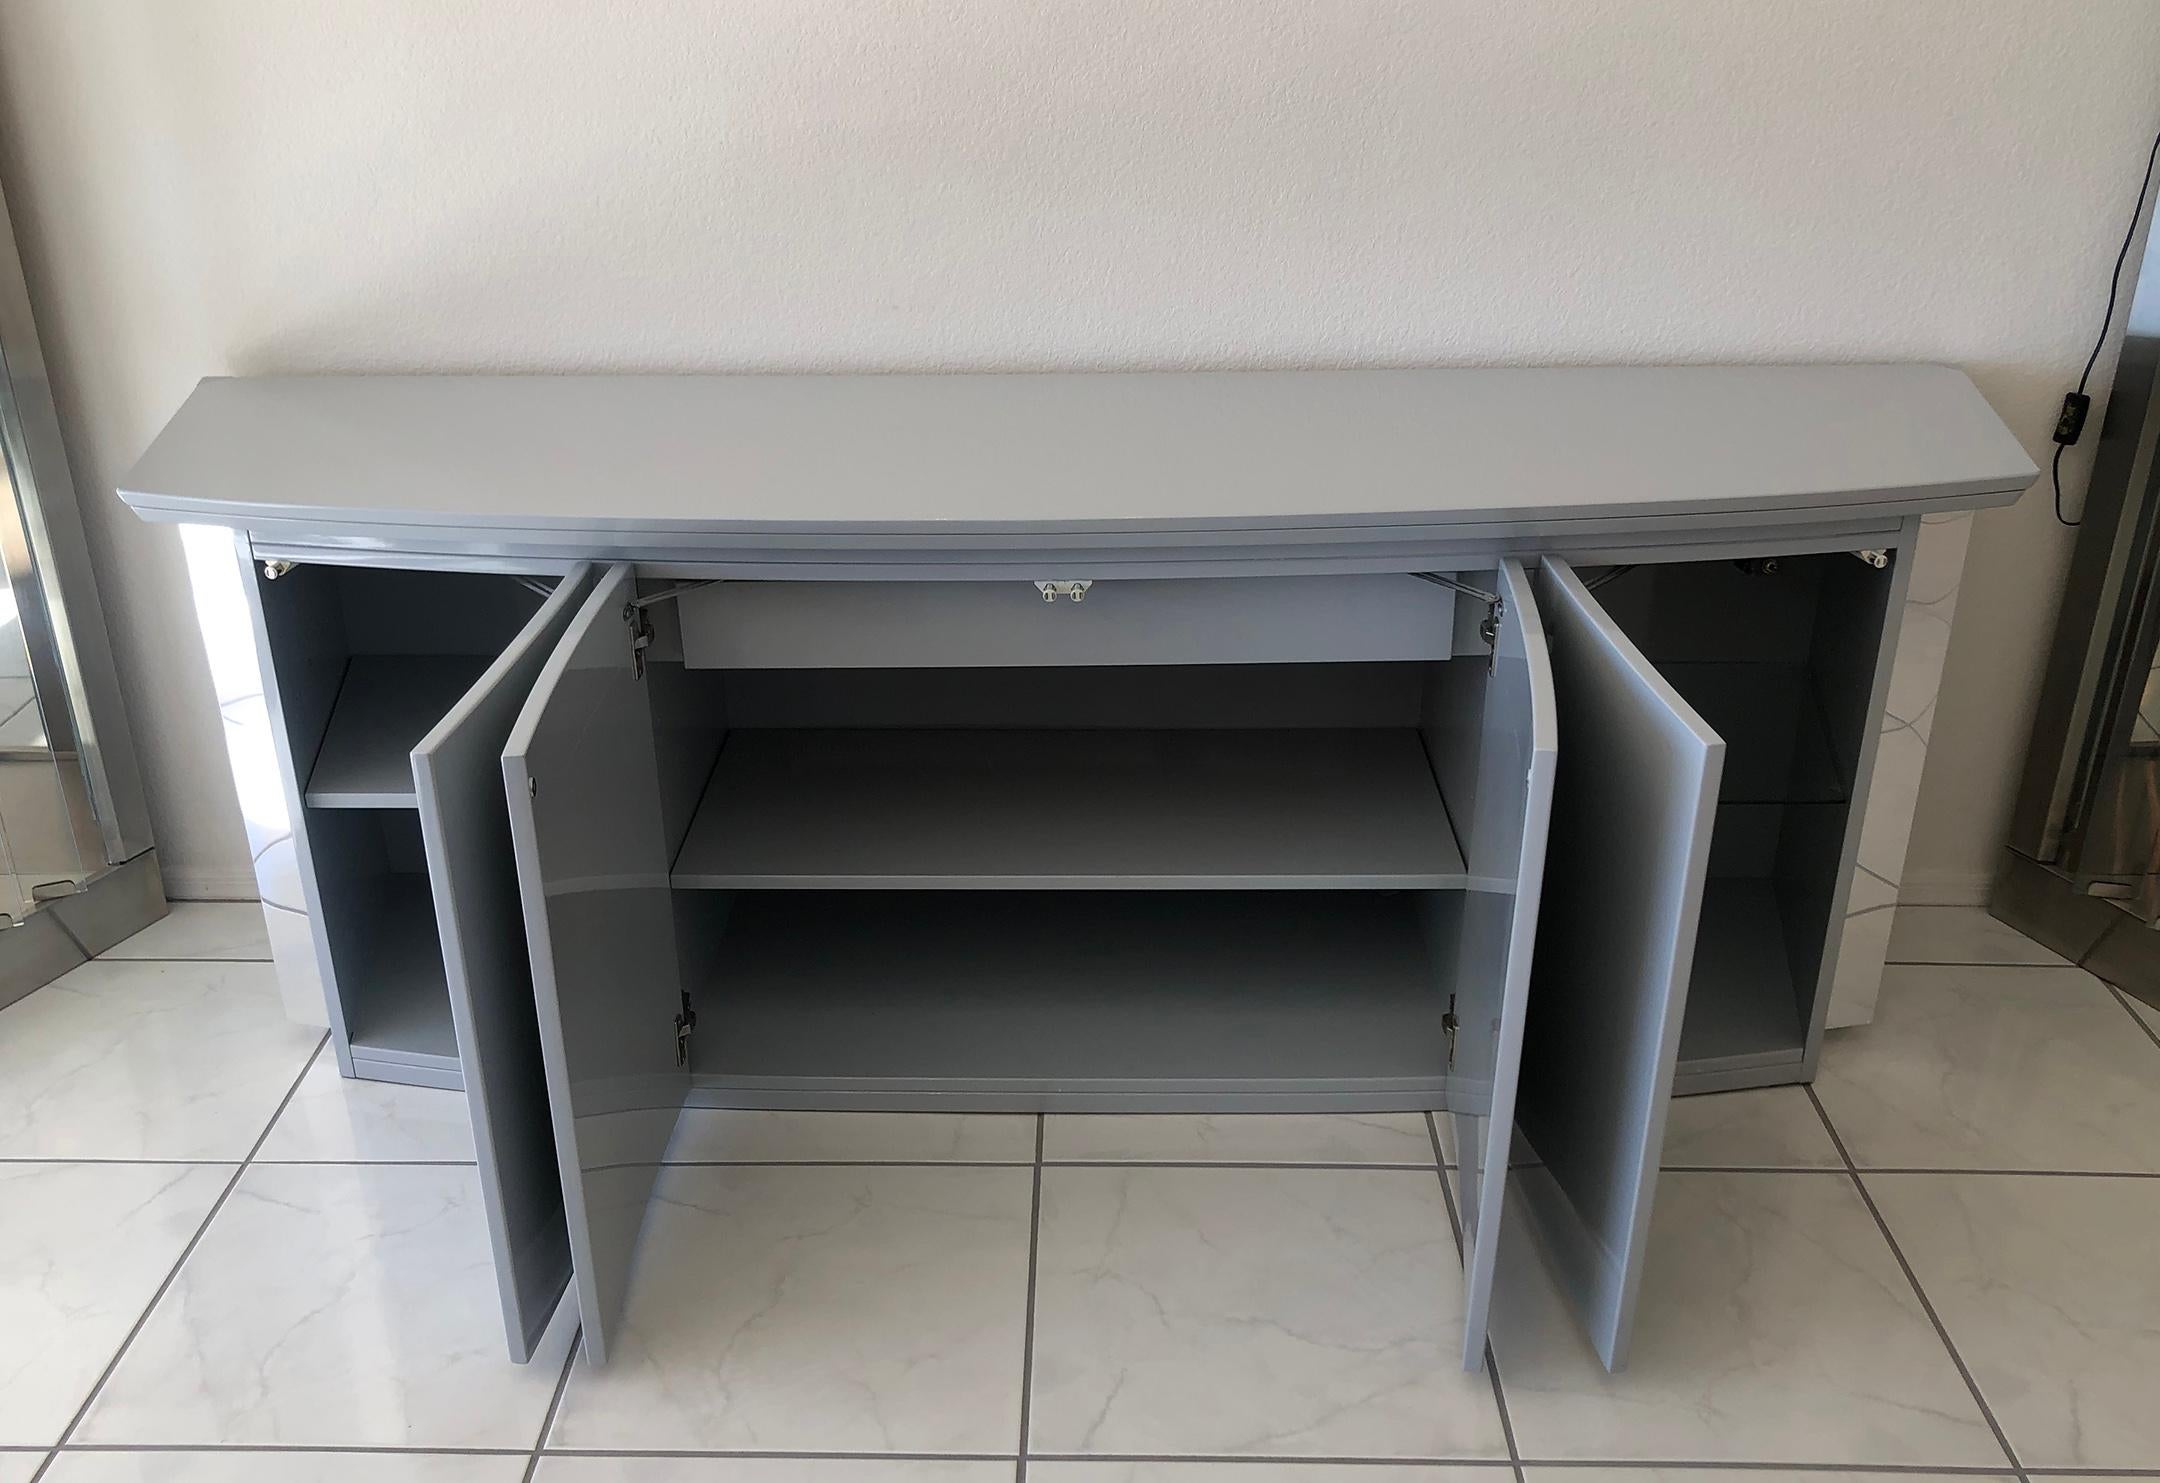 An absolutely stunning credenza or buffet designed by Rougier. This grey, high gloss credenza features exaggerated chrome accents and is in near perfect condition with very minimal wear.

This Post modern credenza has a very Karl Springer style